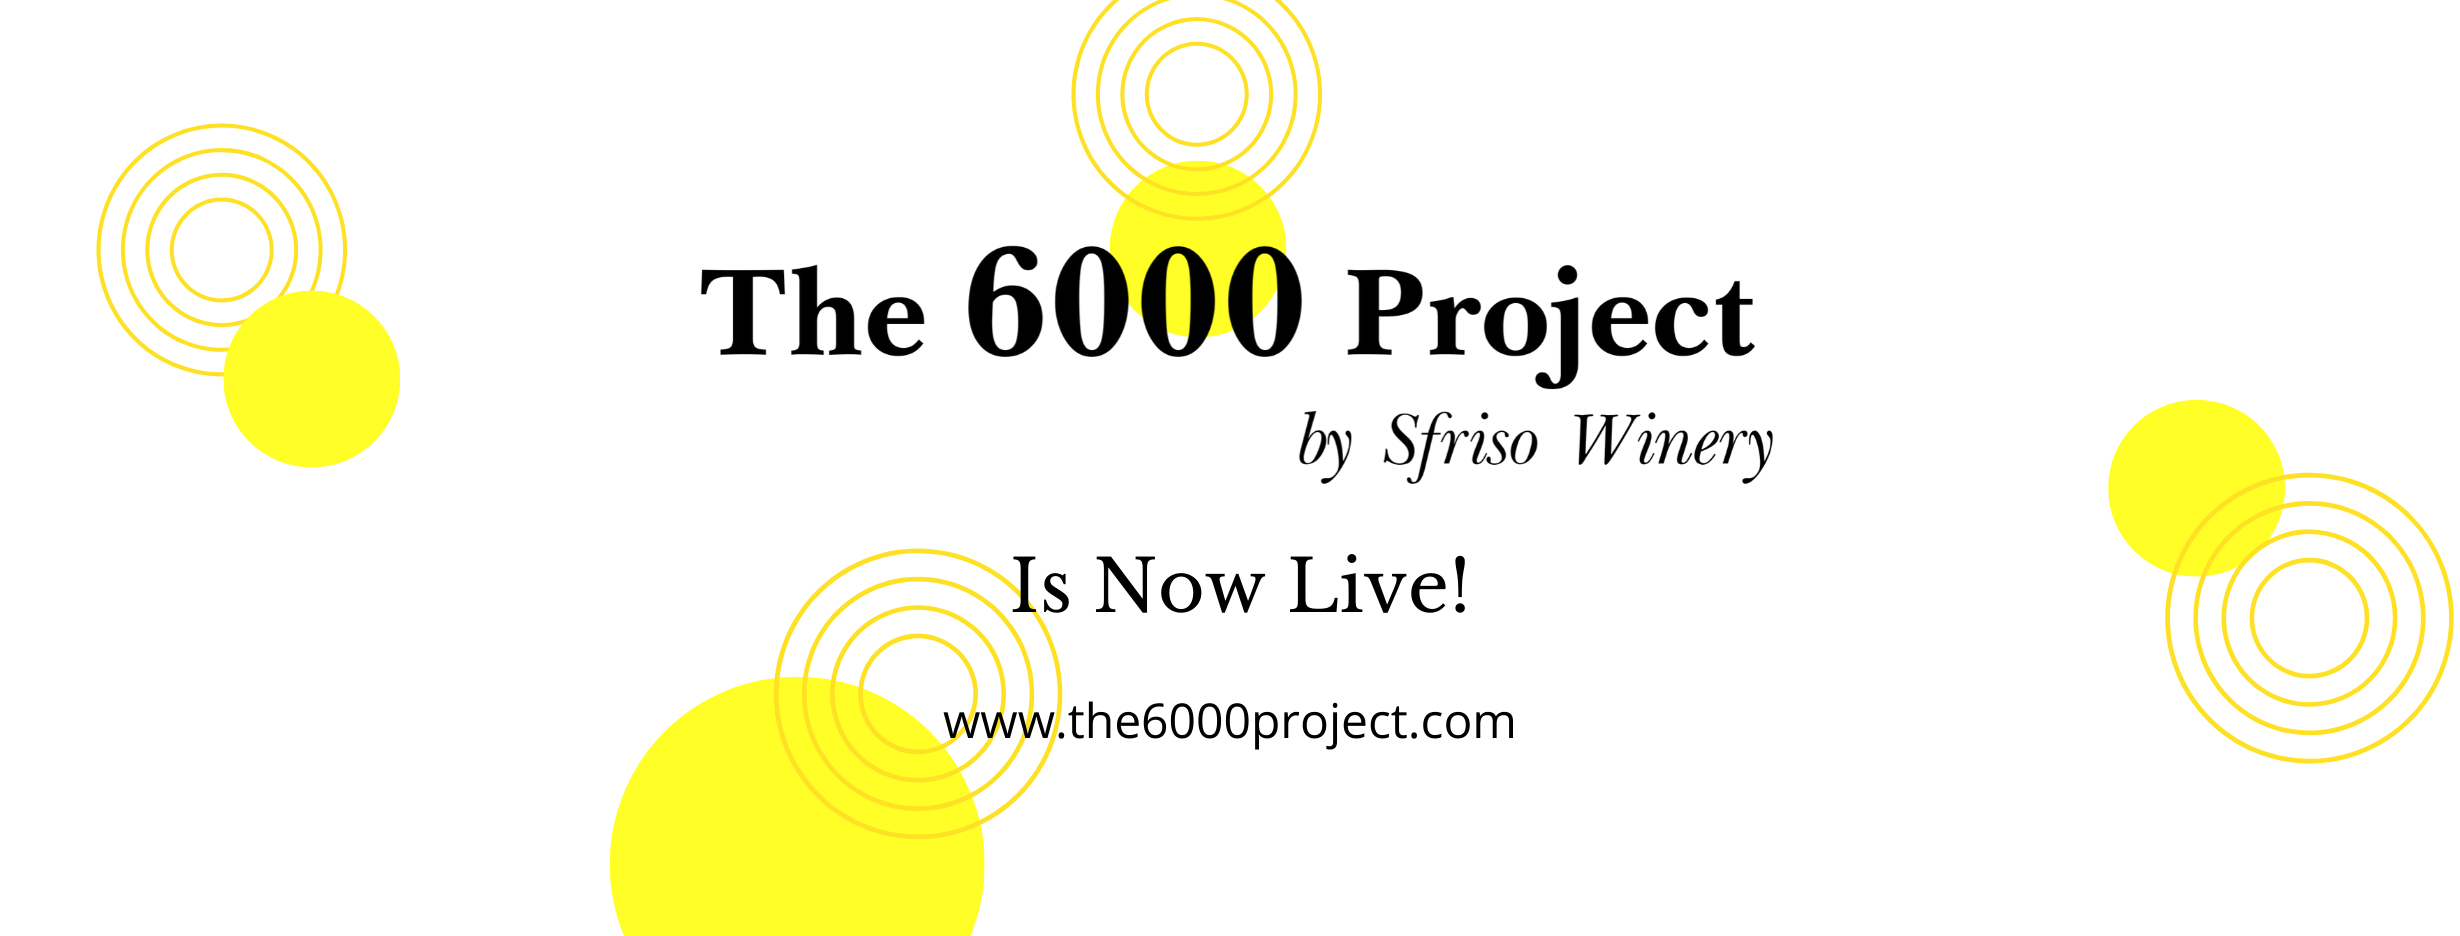 The 6000 Project